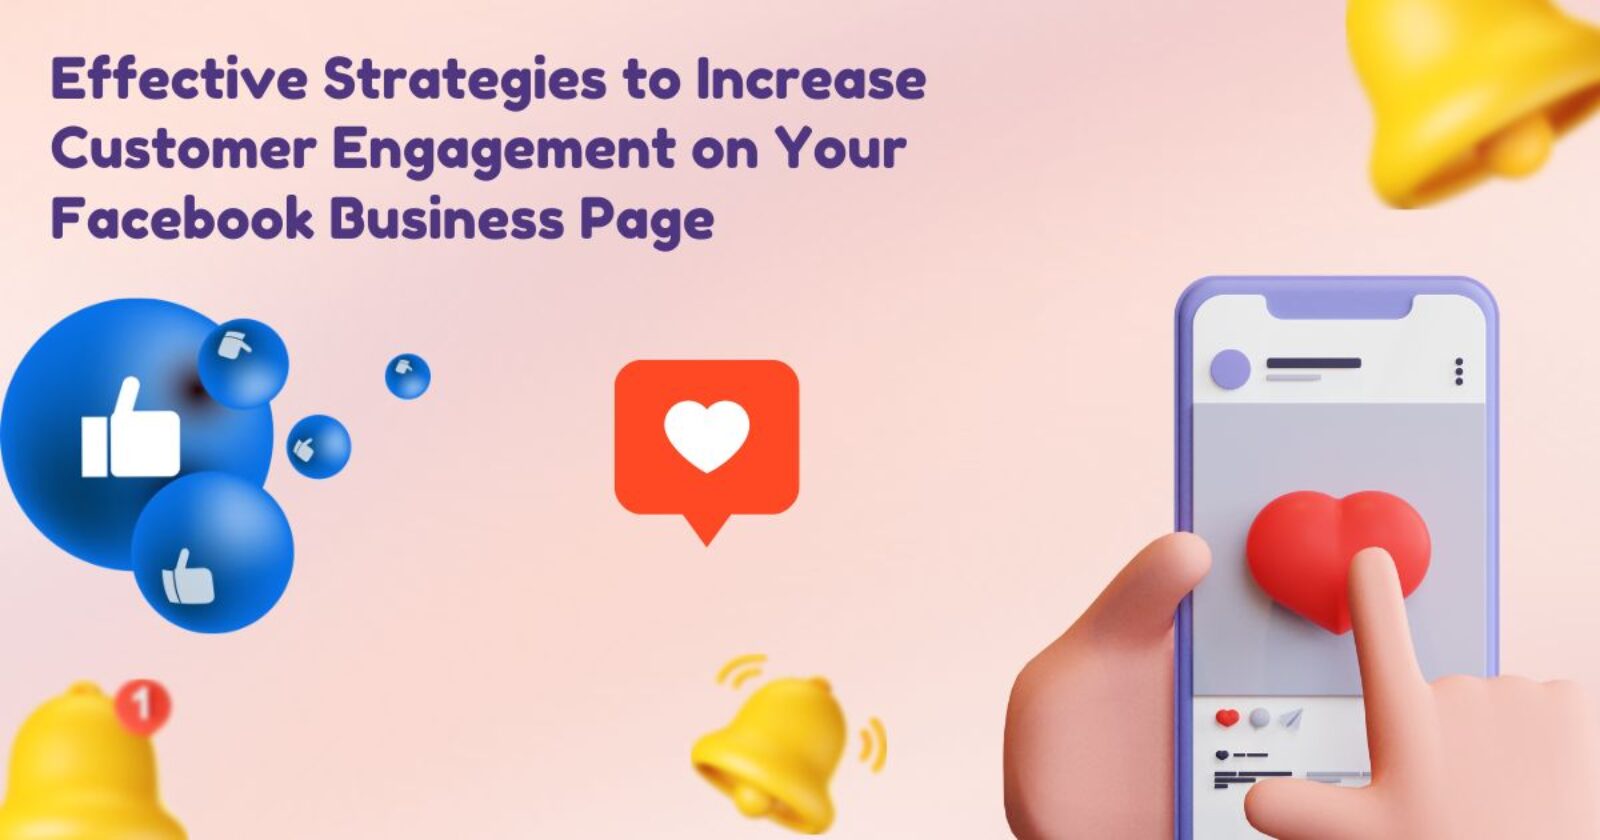 Effective Strategies to Increase Customer Engagement on Your Facebook Business Page